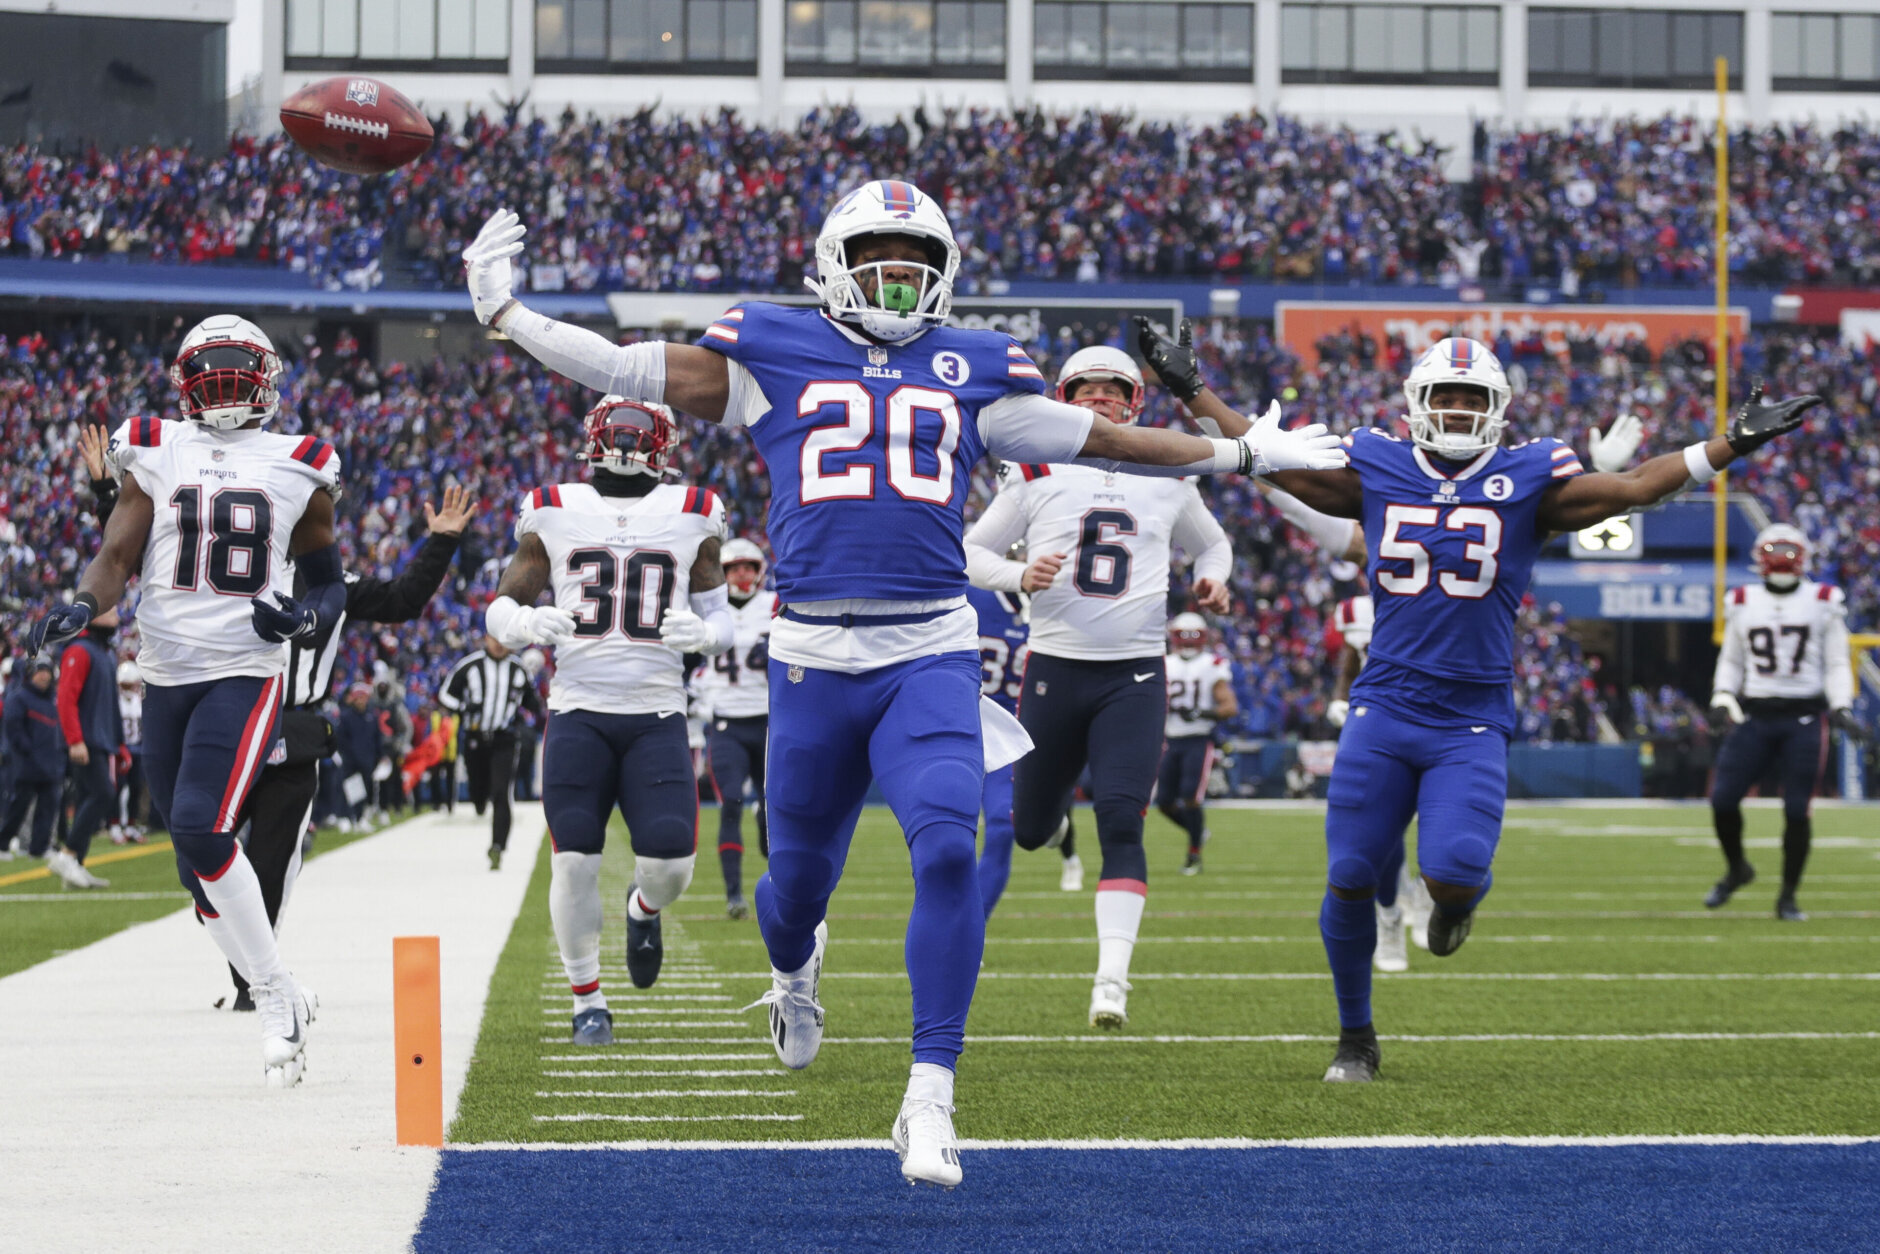 <p><em><strong>Patriots 23</strong></em><br />
<em><strong>Bills 35</strong></em></p>
<p>Buffalo returned the opening kickoff for a touchdown in their first action since the Damar Hamlin incident and throttled their hated rival to match franchise records with seven straight wins to reach 13 for the season. I&#8217;m feeling pretty good about <a href="https://wtop.com/gallery/nfl/2022-nfl-playoff-predictions/" target="_blank" rel="noopener">my preseason Super Bowl pick</a>.</p>
<p>I know what Bill Belichick is historically but New England needs a hard reset. If Mike Vrabel gets fired in Tennessee, the Patriots would do well to turn the page on the Belichick era and hand off to an experienced coach already well-versed in the Patriot Way.</p>
